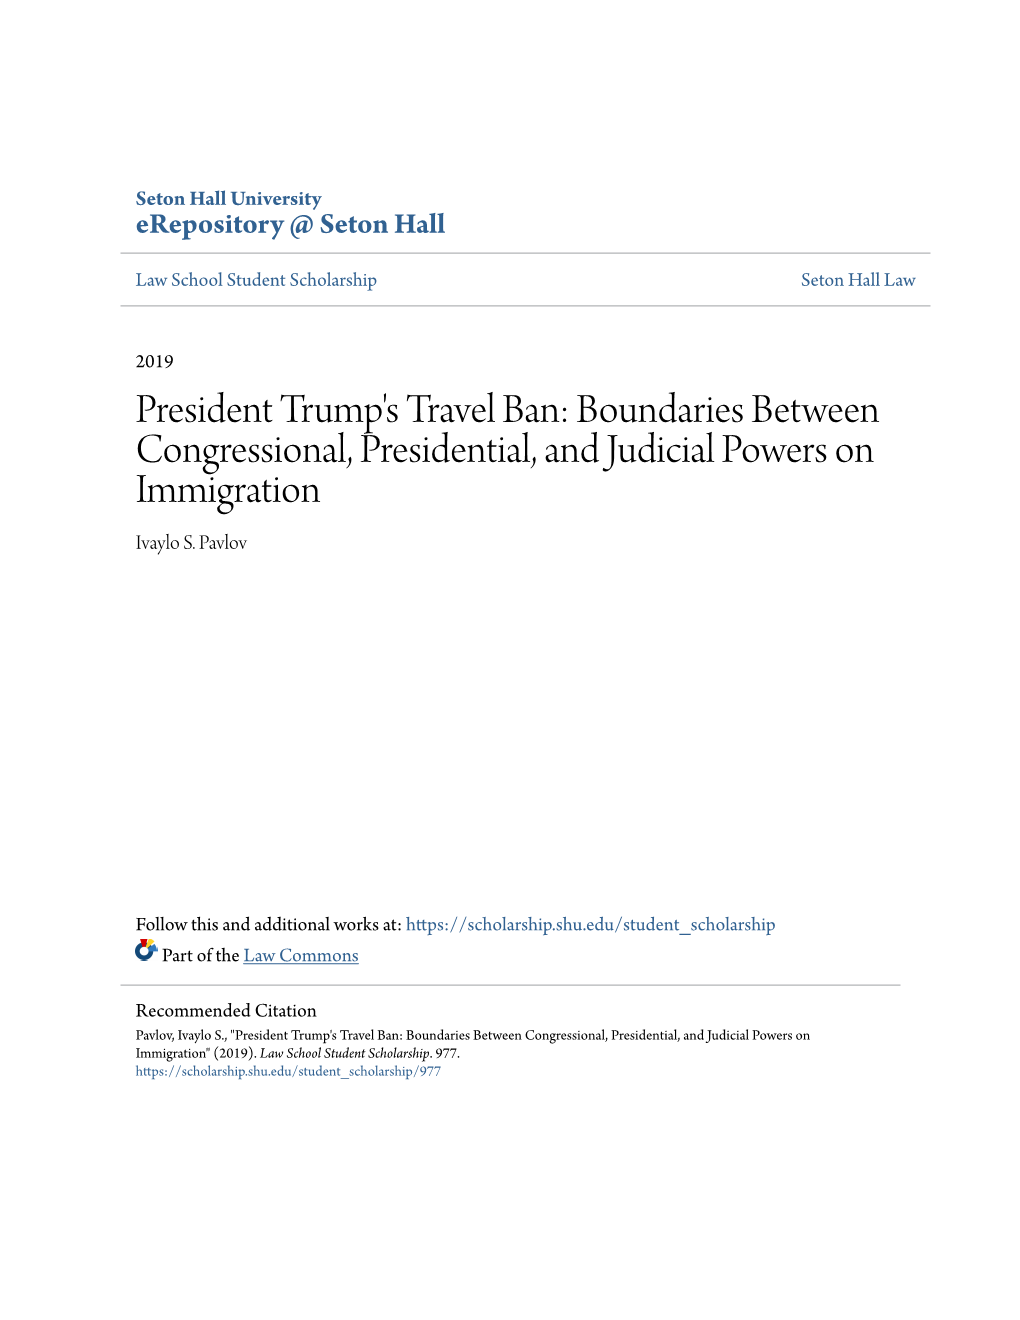 President Trump's Travel Ban: Boundaries Between Congressional, Presidential, and Judicial Powers on Immigration Ivaylo S